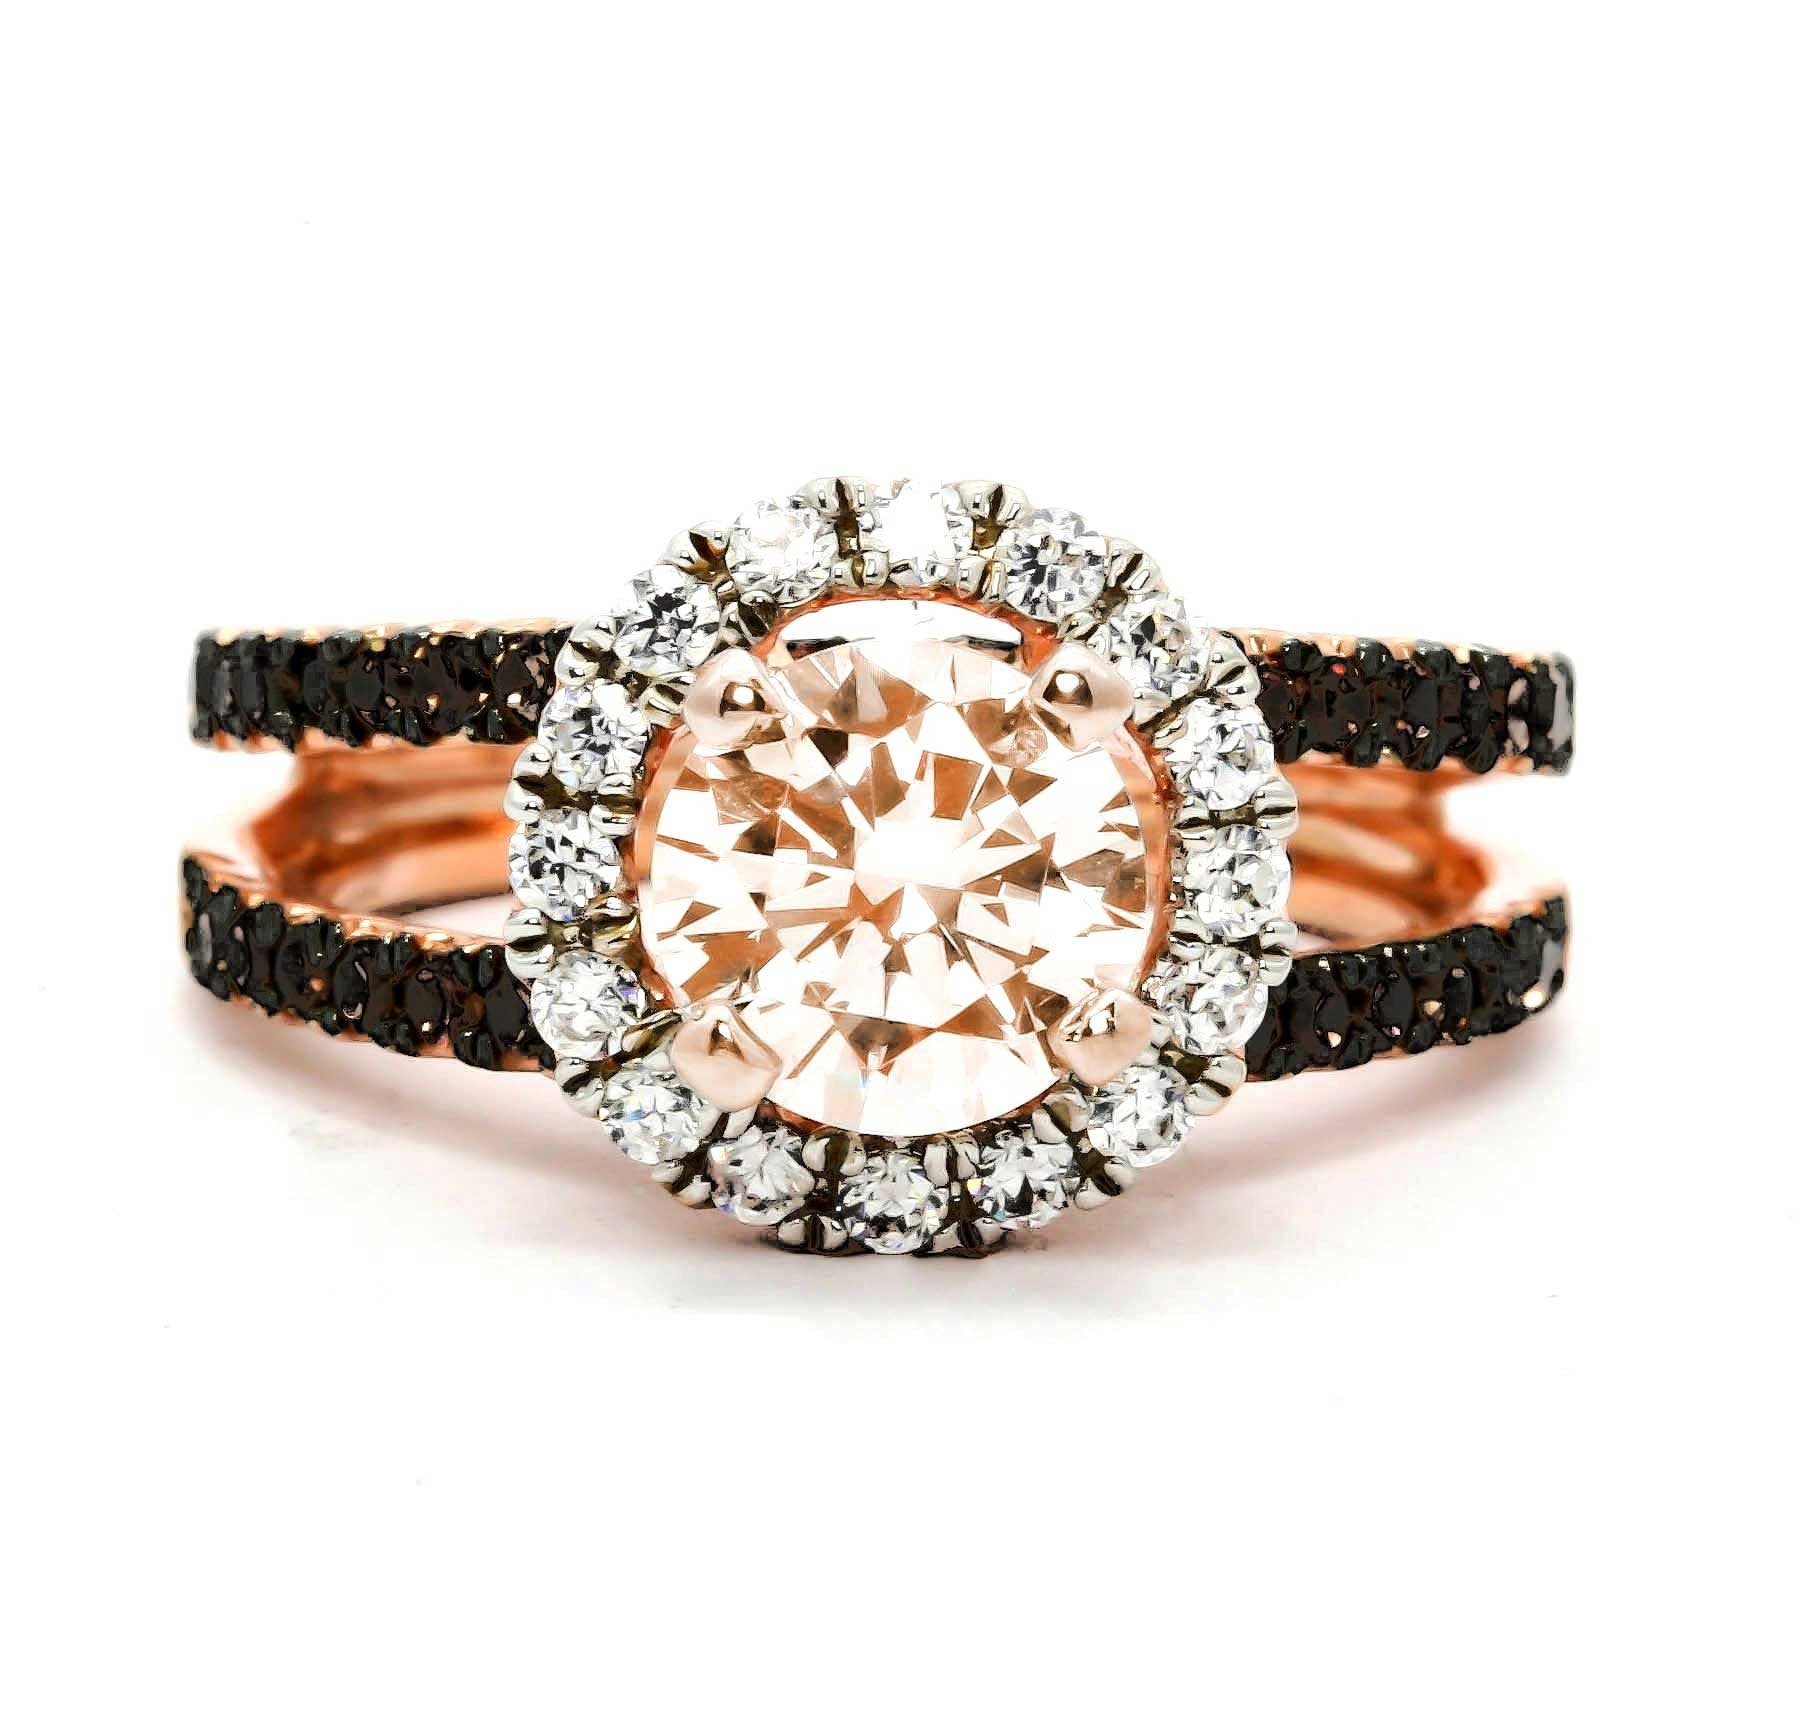 1 Carat Morganite with Black Diamonds, Floating Halo Rose Gold Engagement Ring With 1.02 Carats of White and Black Diamonds, Anniversary Ring - MG94654B